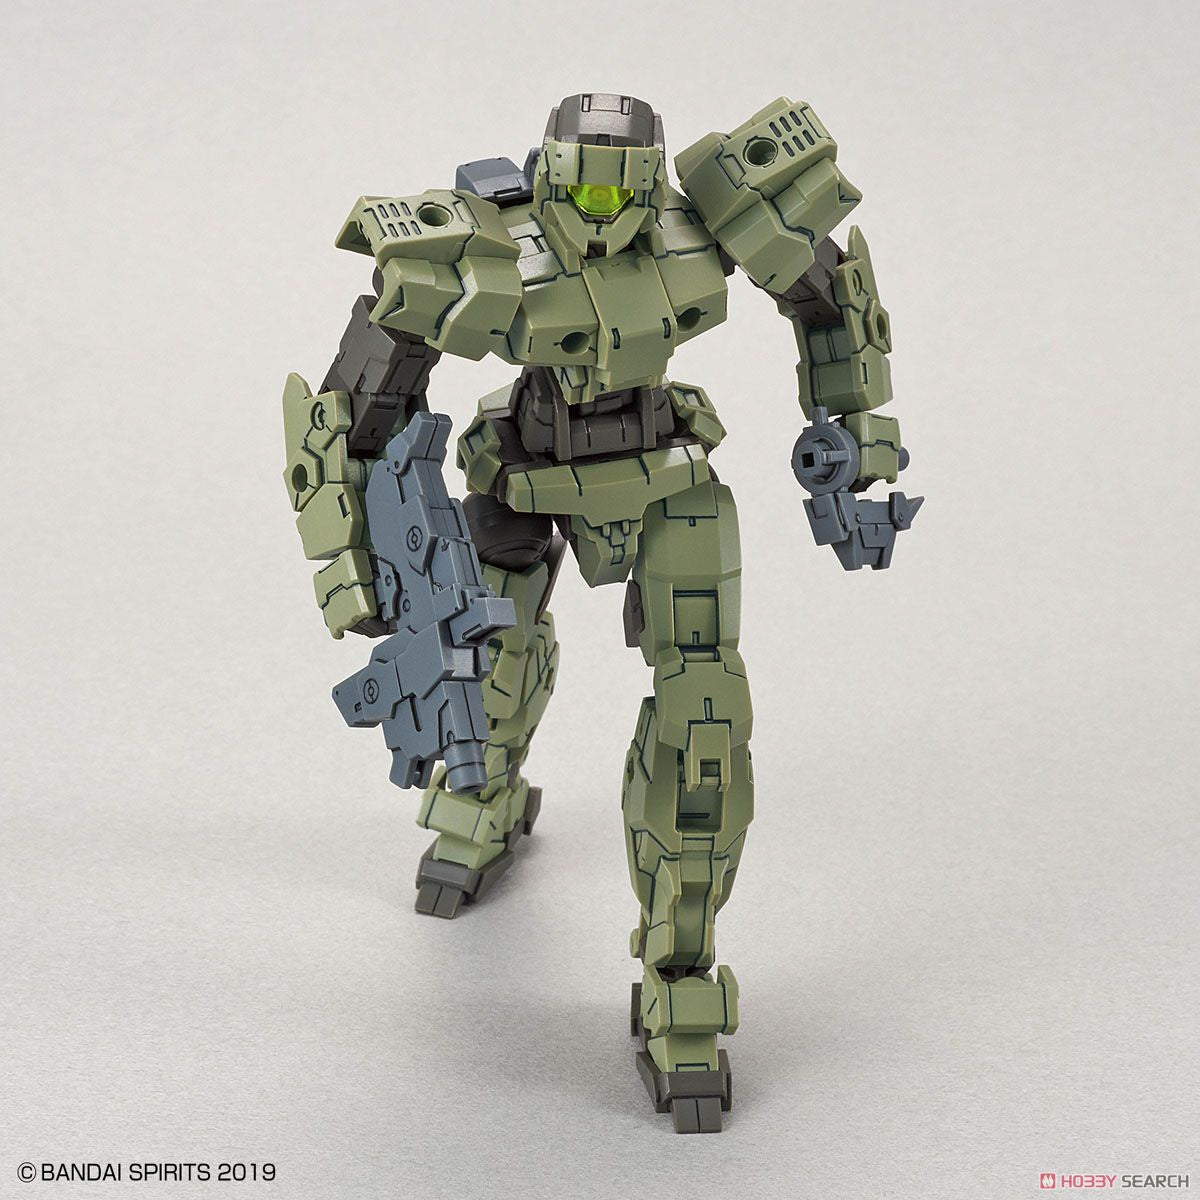 Alto 1/144 Green 30 Minutes Missions Model Kit #5058837 by Bandai